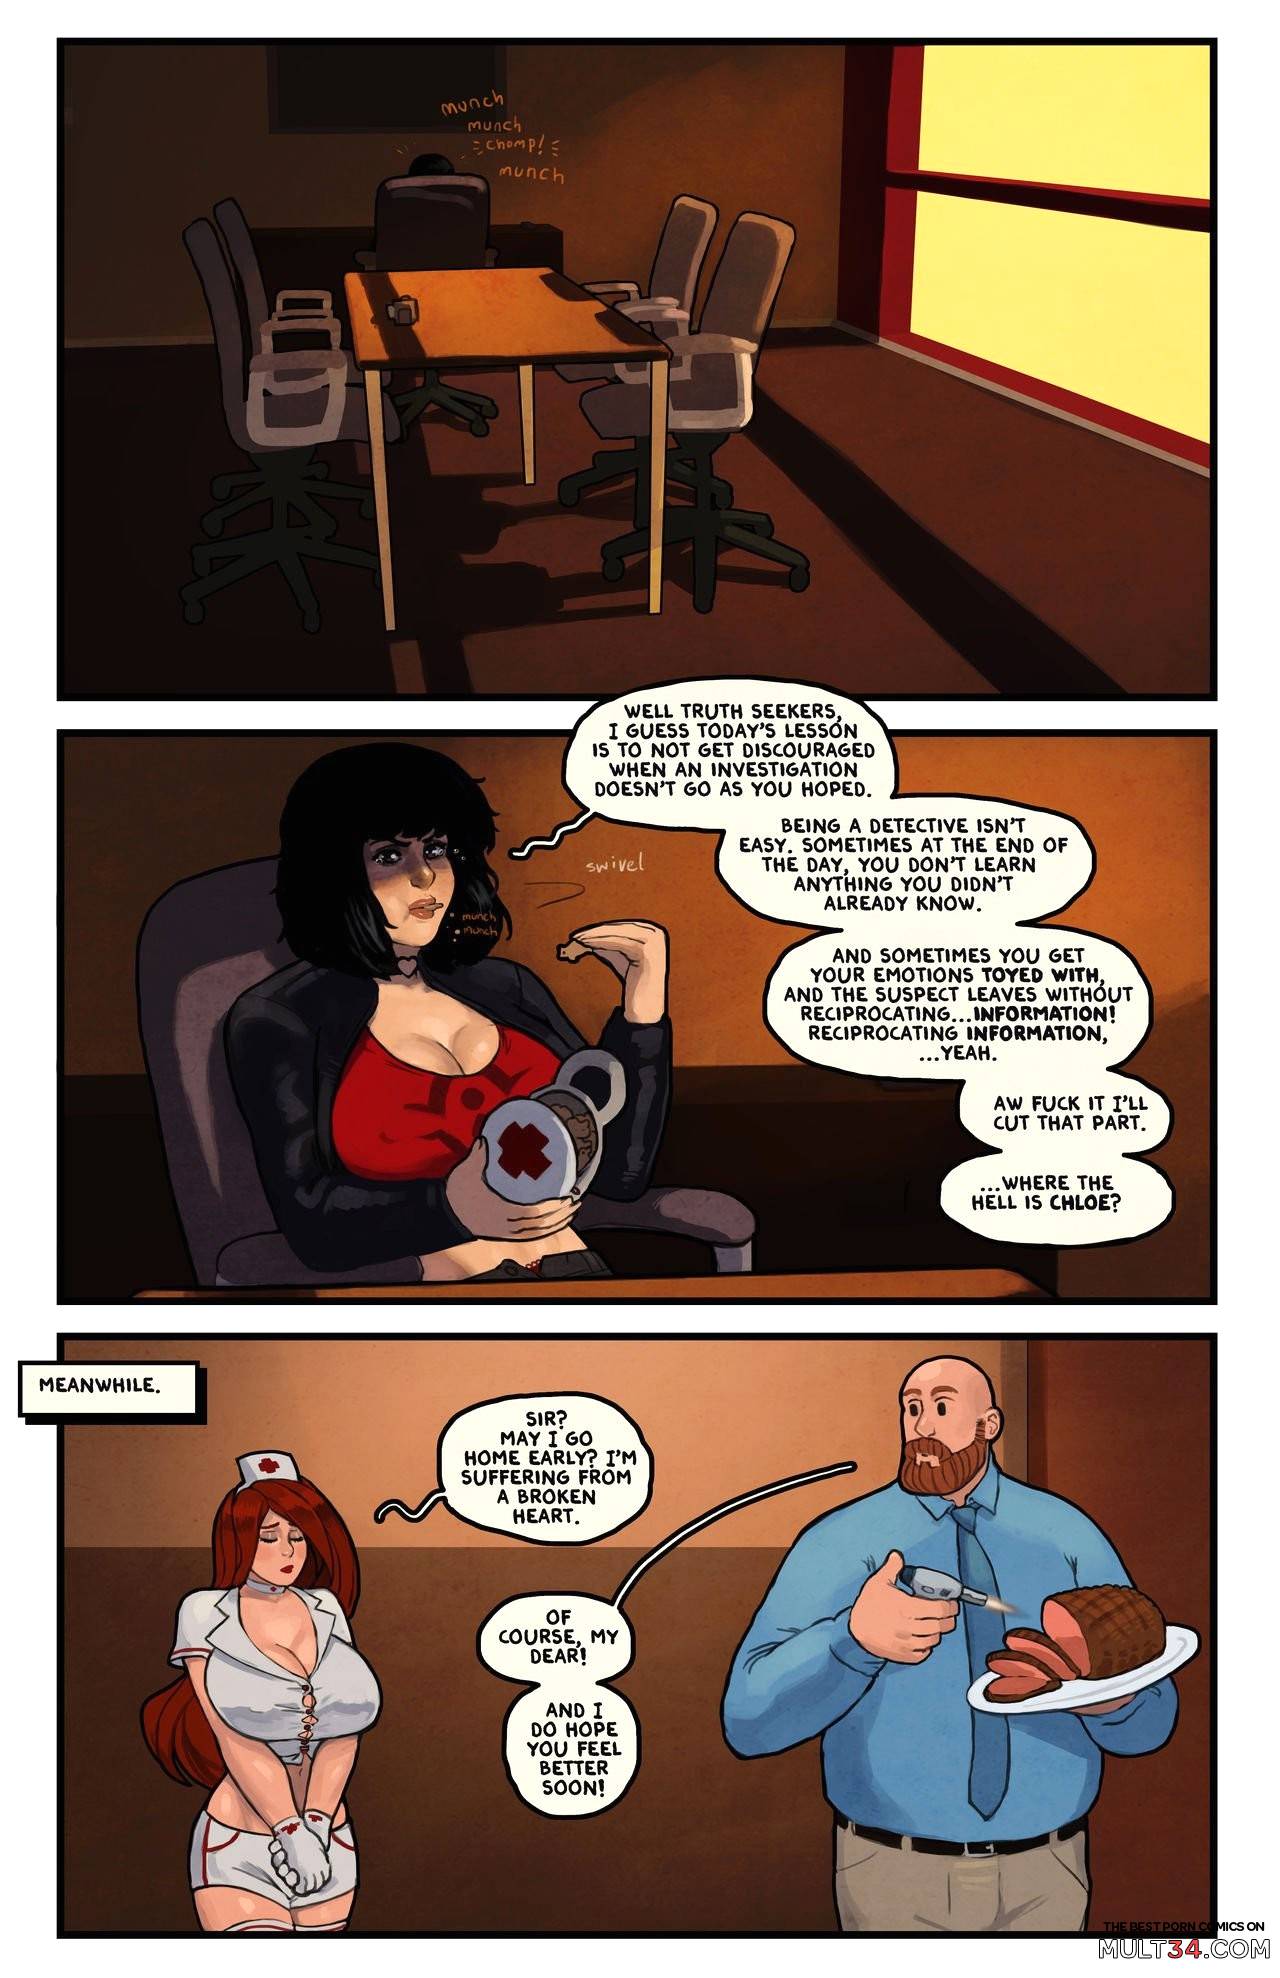 This Romantic World 6 page 54